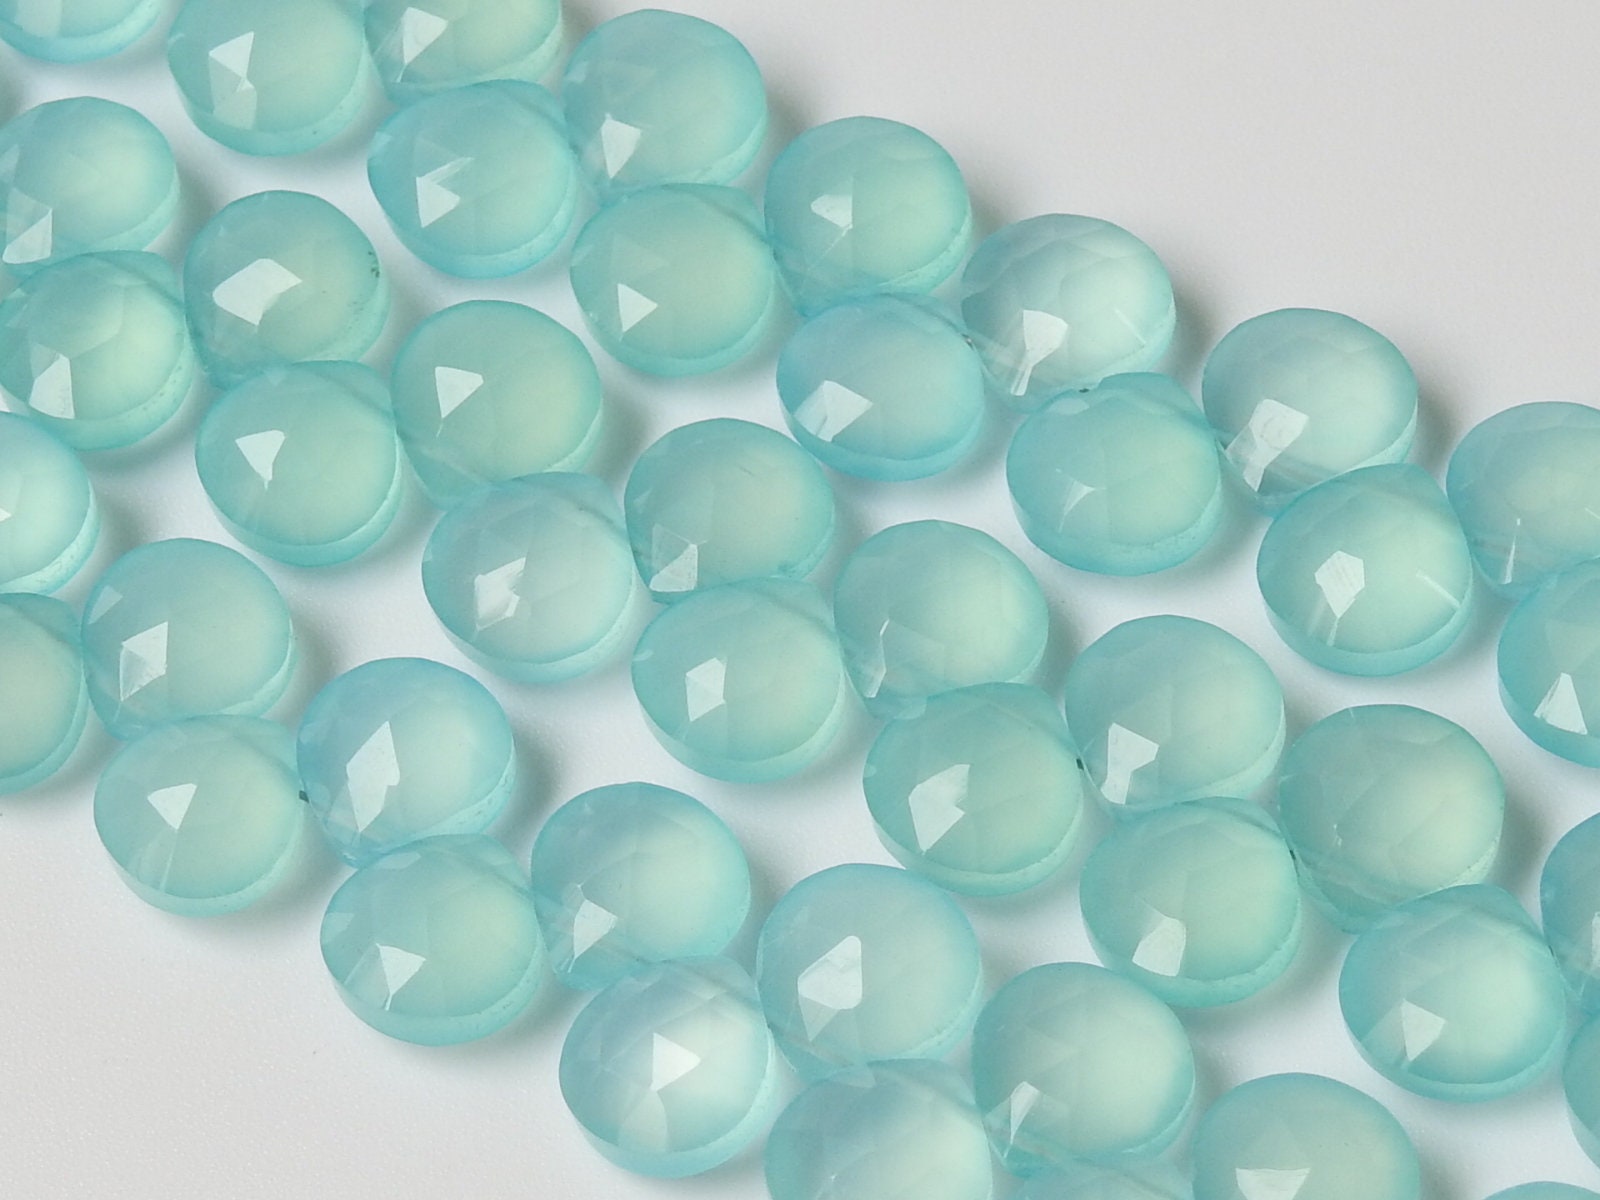 Aqua Blue Chalcedony Faceted Hearts,Teardrop,Drop,Loose Stone,Handmade,Earrings Pair,For Making Jewelry 4Inch Strand 8X8 MM Approx (pme)CY2 | Save 33% - Rajasthan Living 15